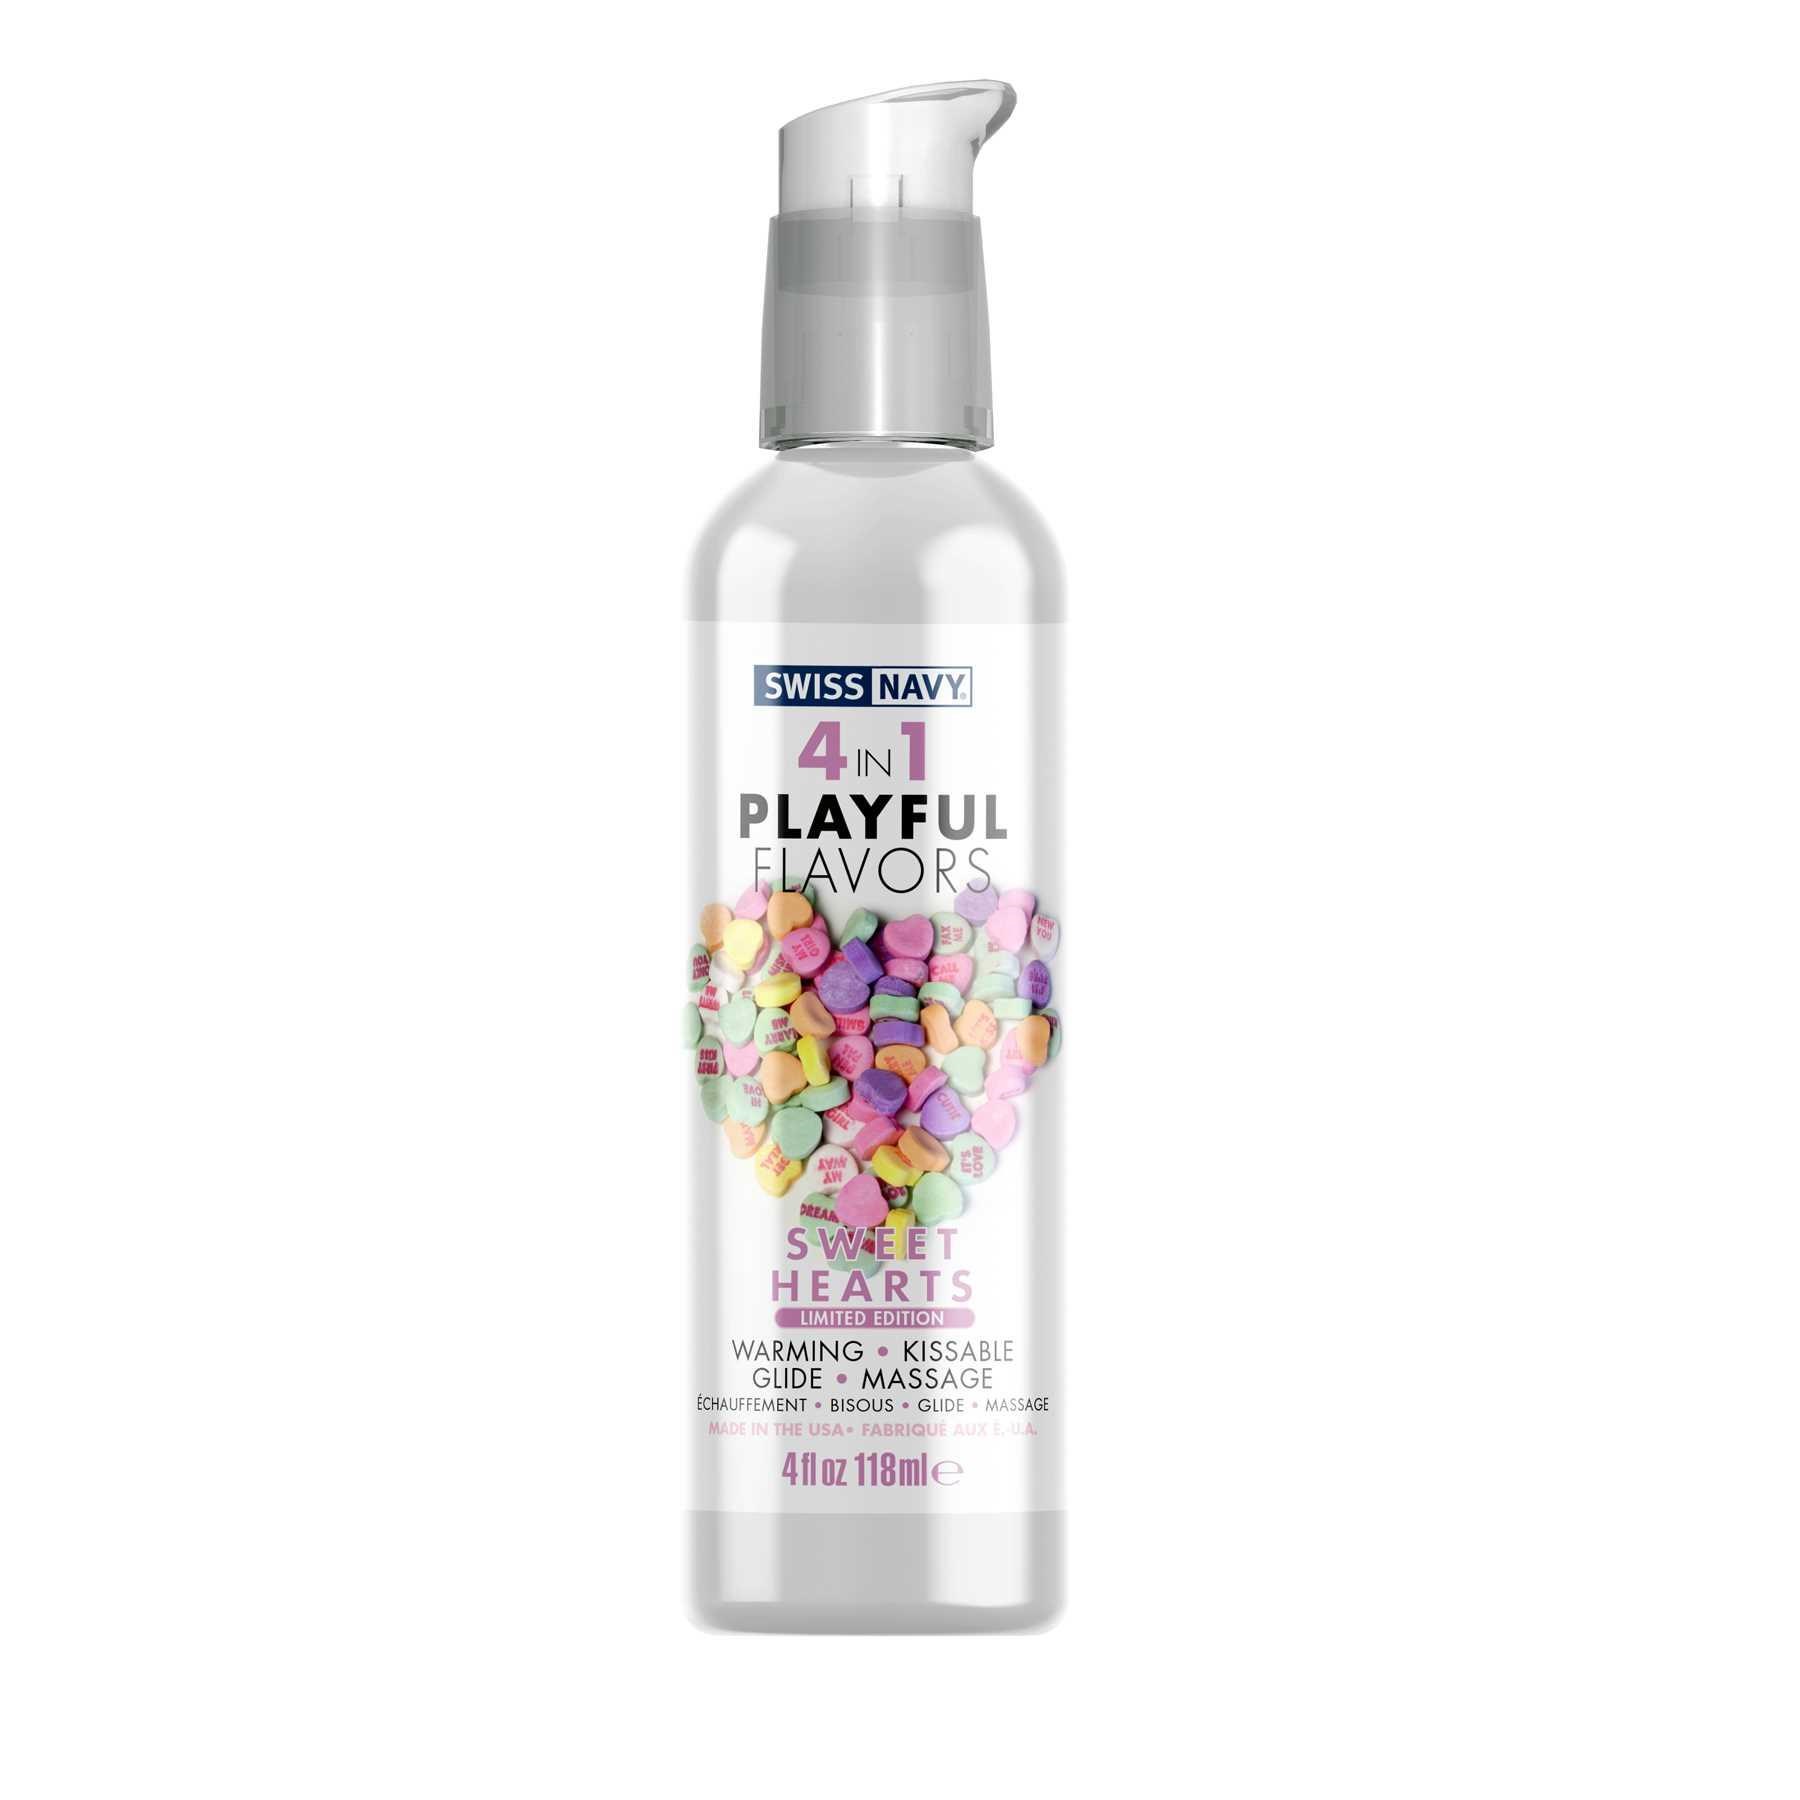 Sweet Treat 4 in 1 Playful Flavors Water based Lubricant limited edition front of bottle